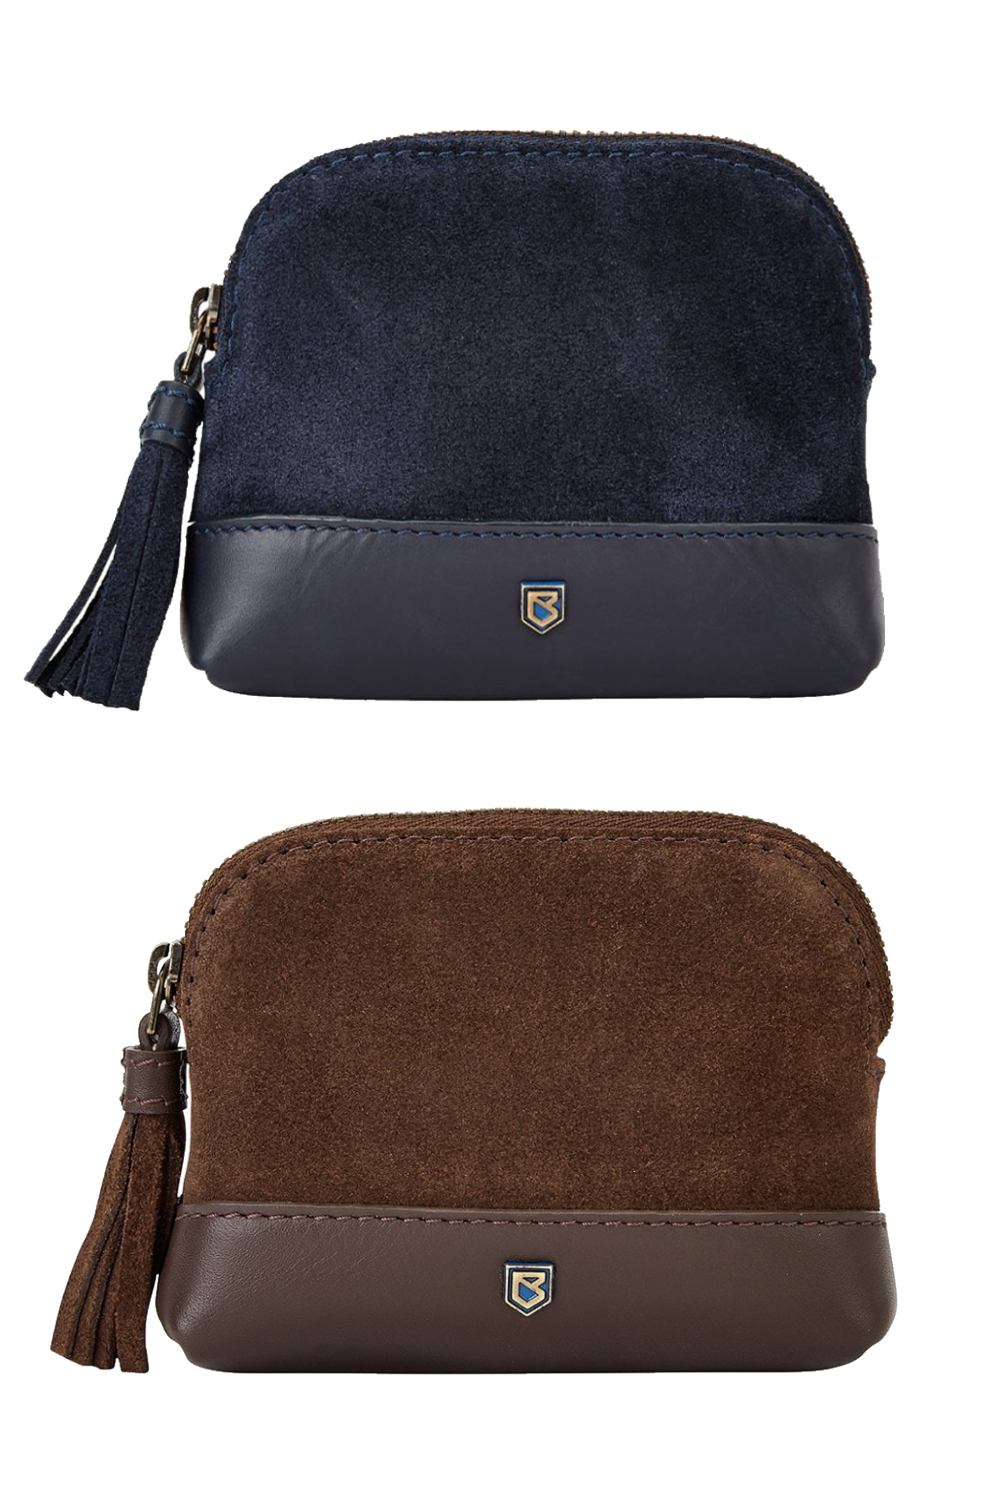 Dubarry Richmond Suede Purse in French Navy, Cigar